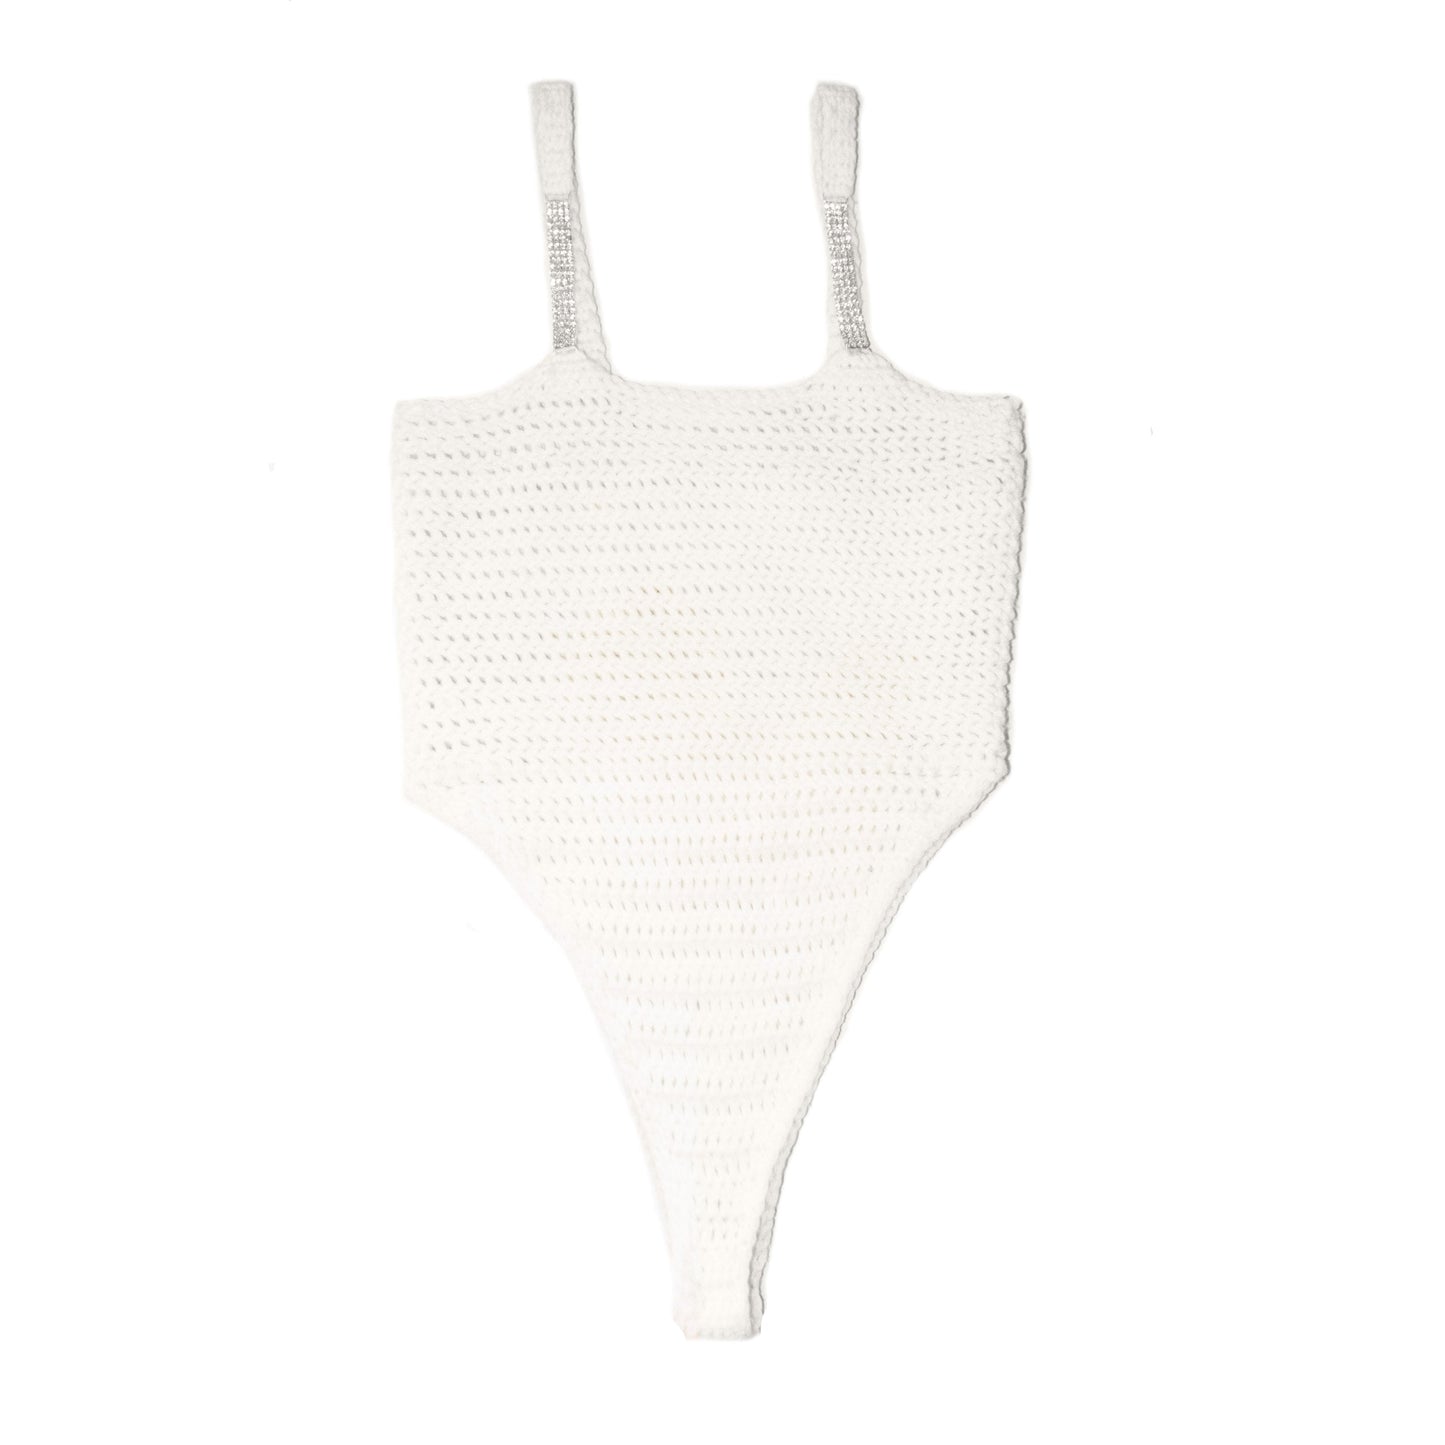 White knit bodysuit with glittery silver straps